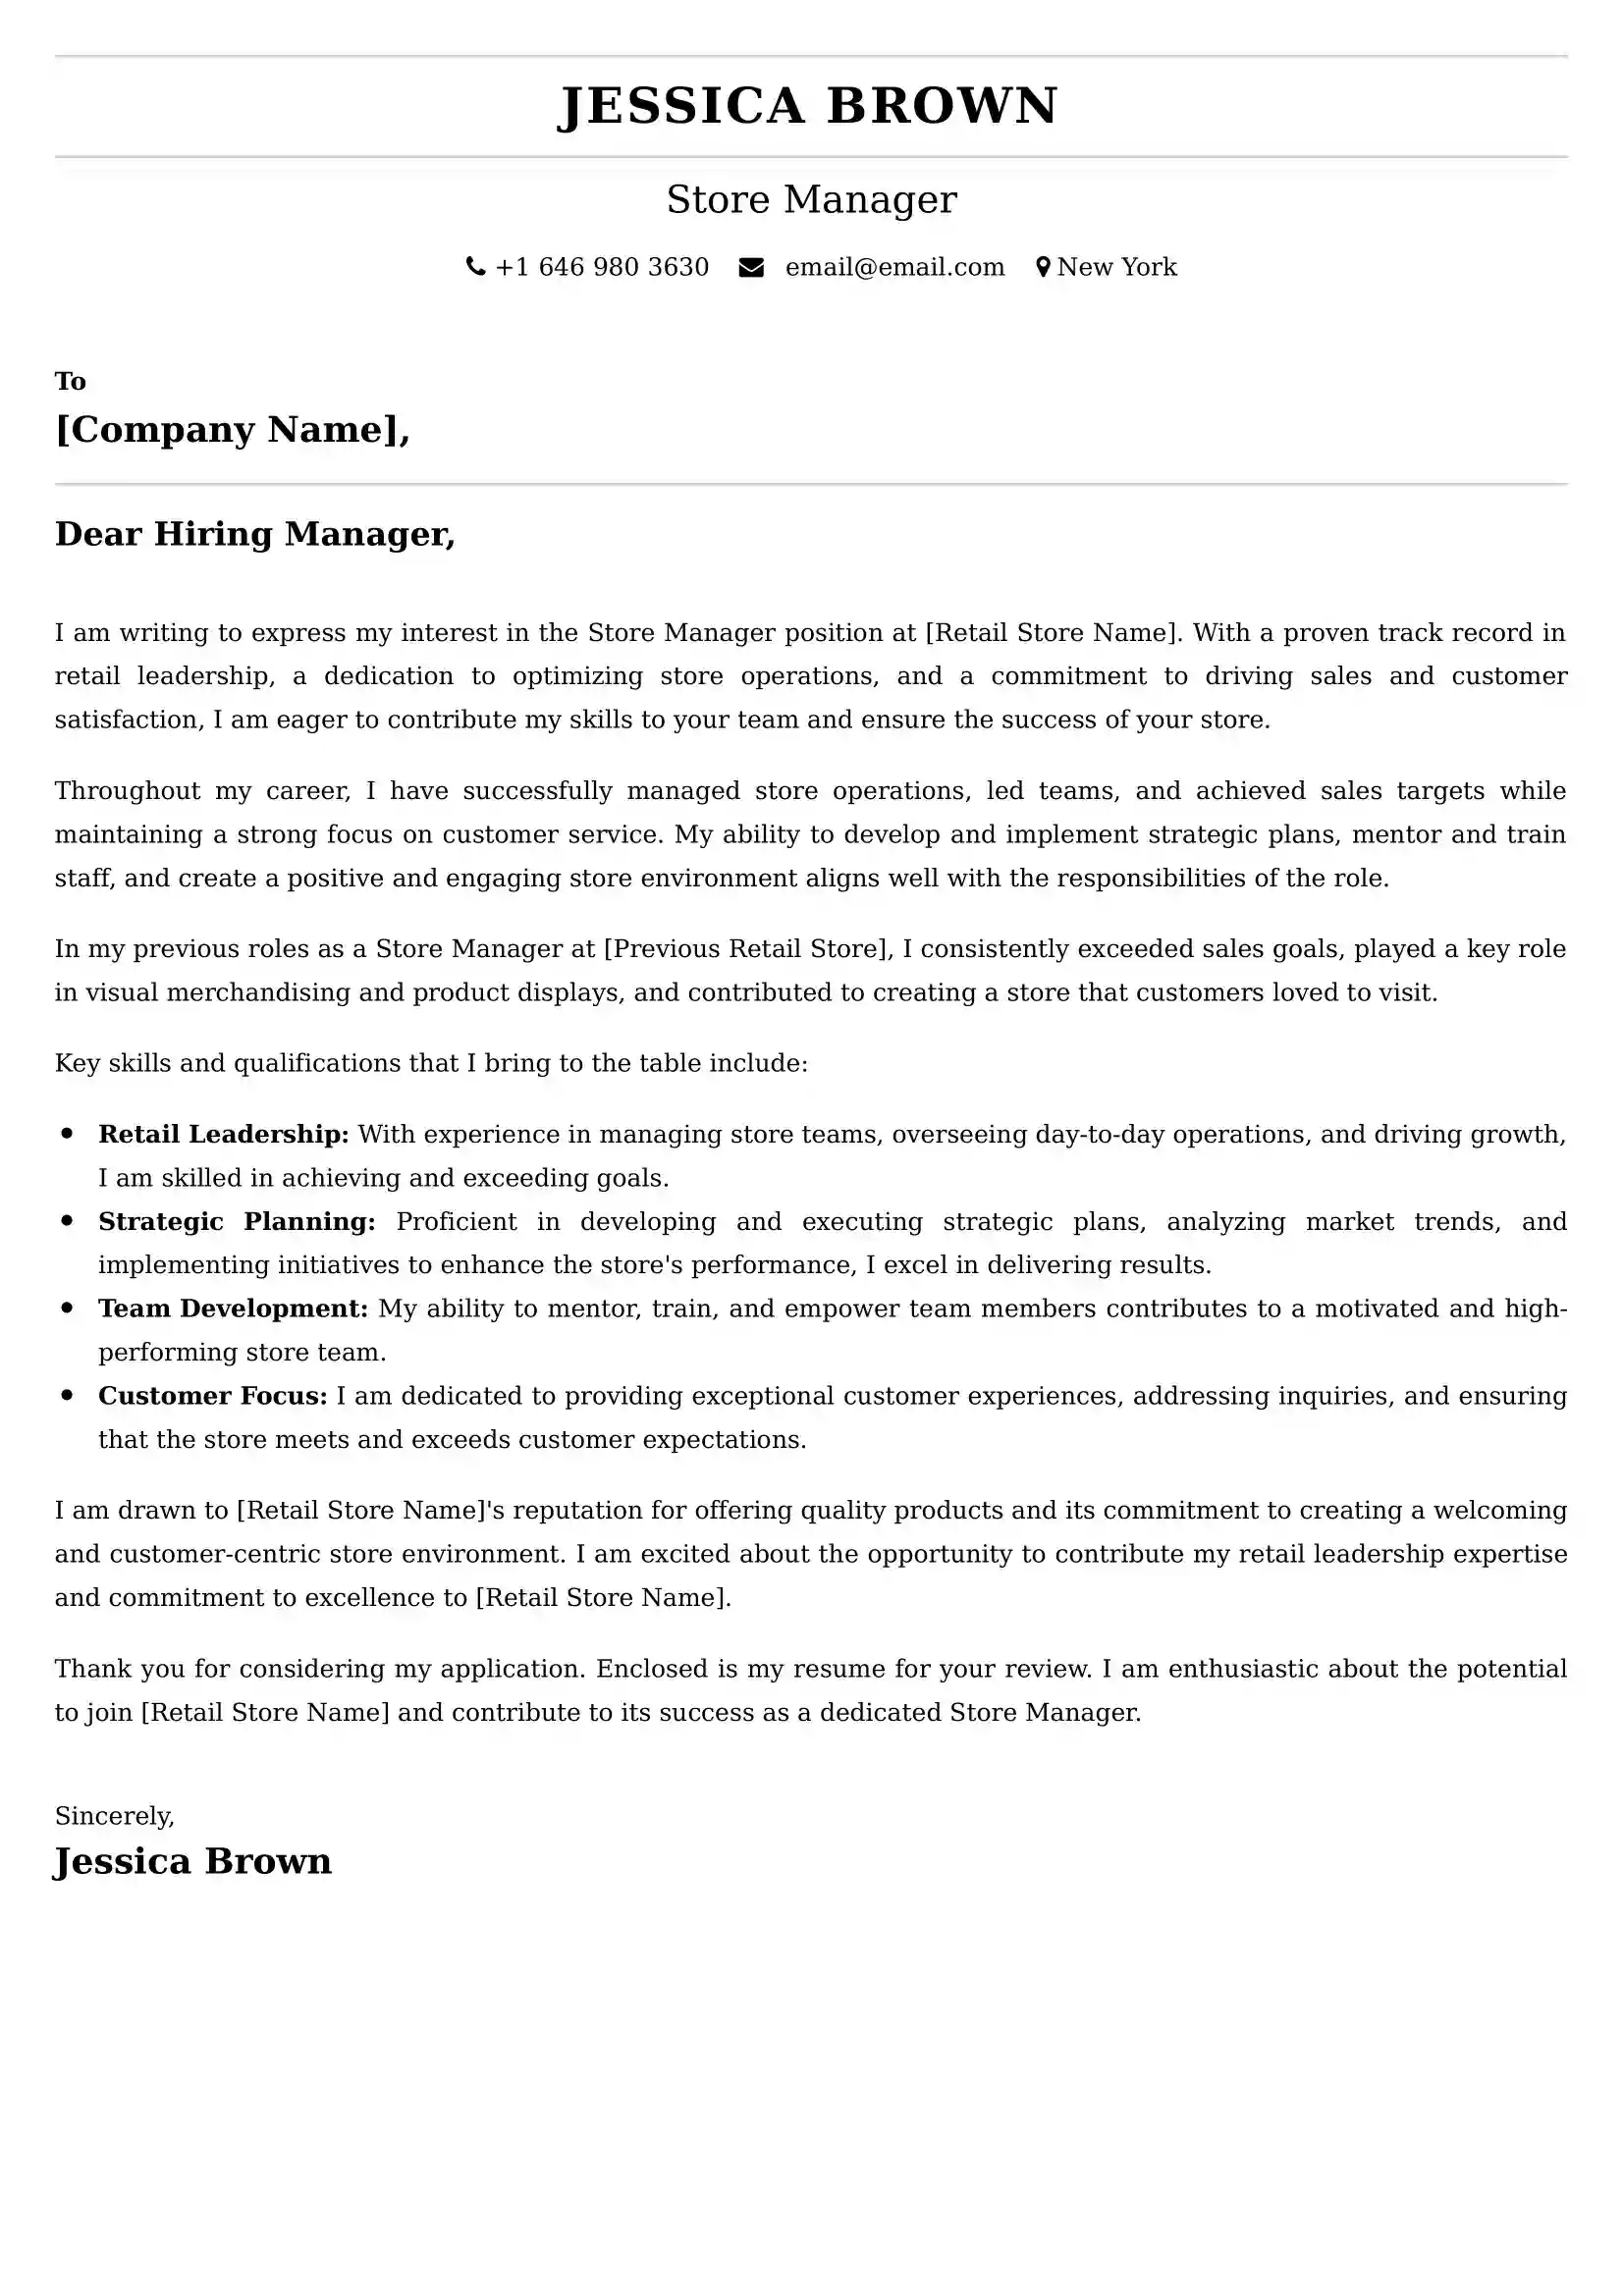 Store Manager Cover Letter Examples -Latest Brazilian Templates